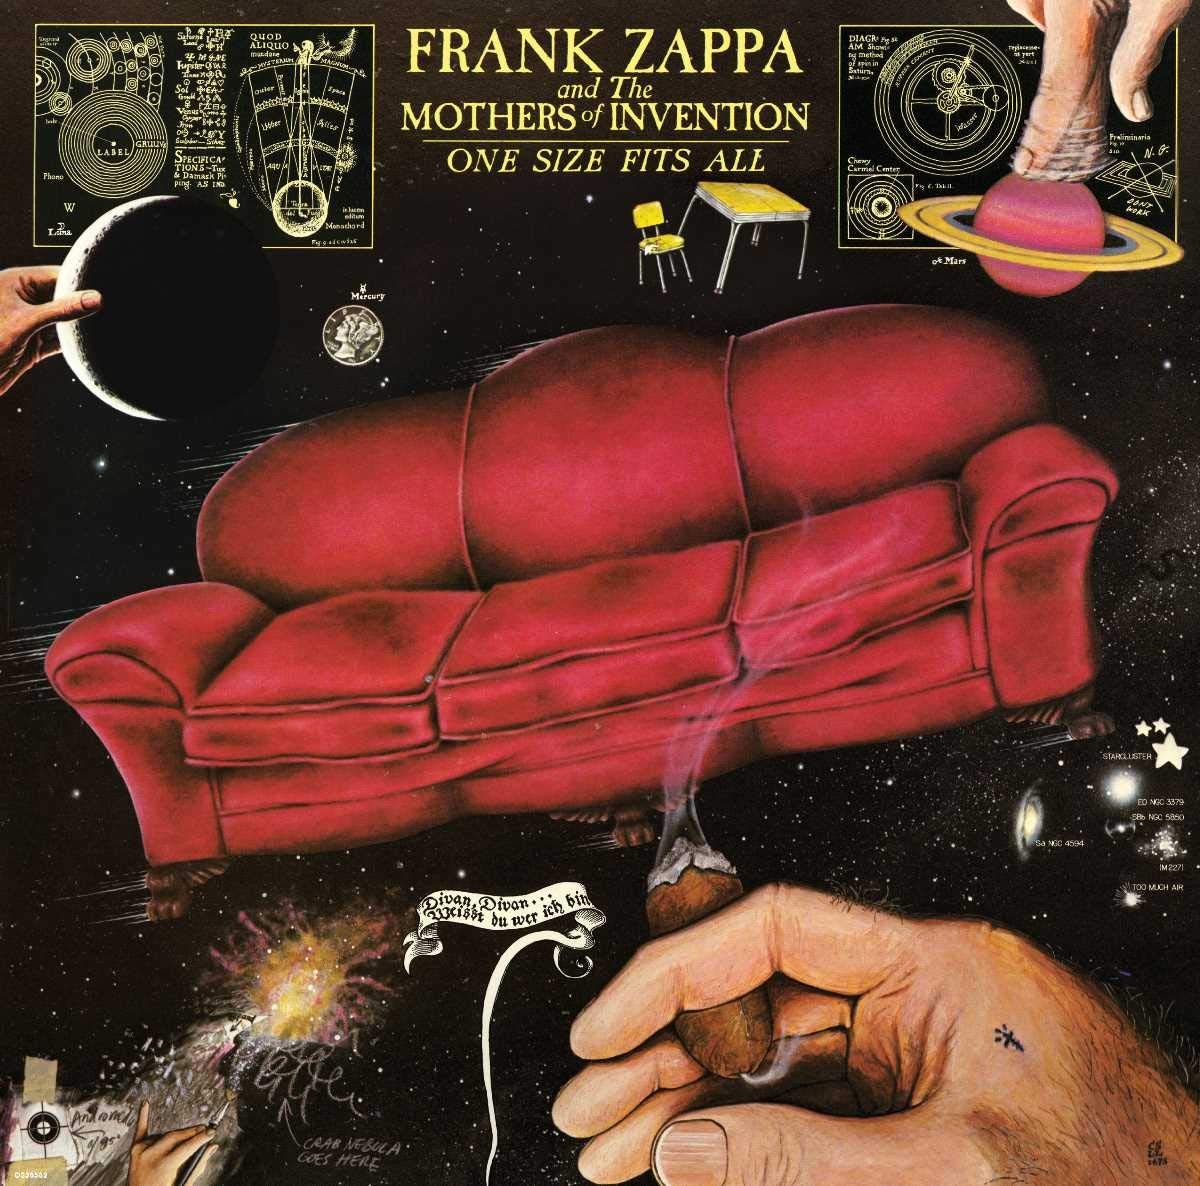 Frank Zappa - One Size Fits All (1975)